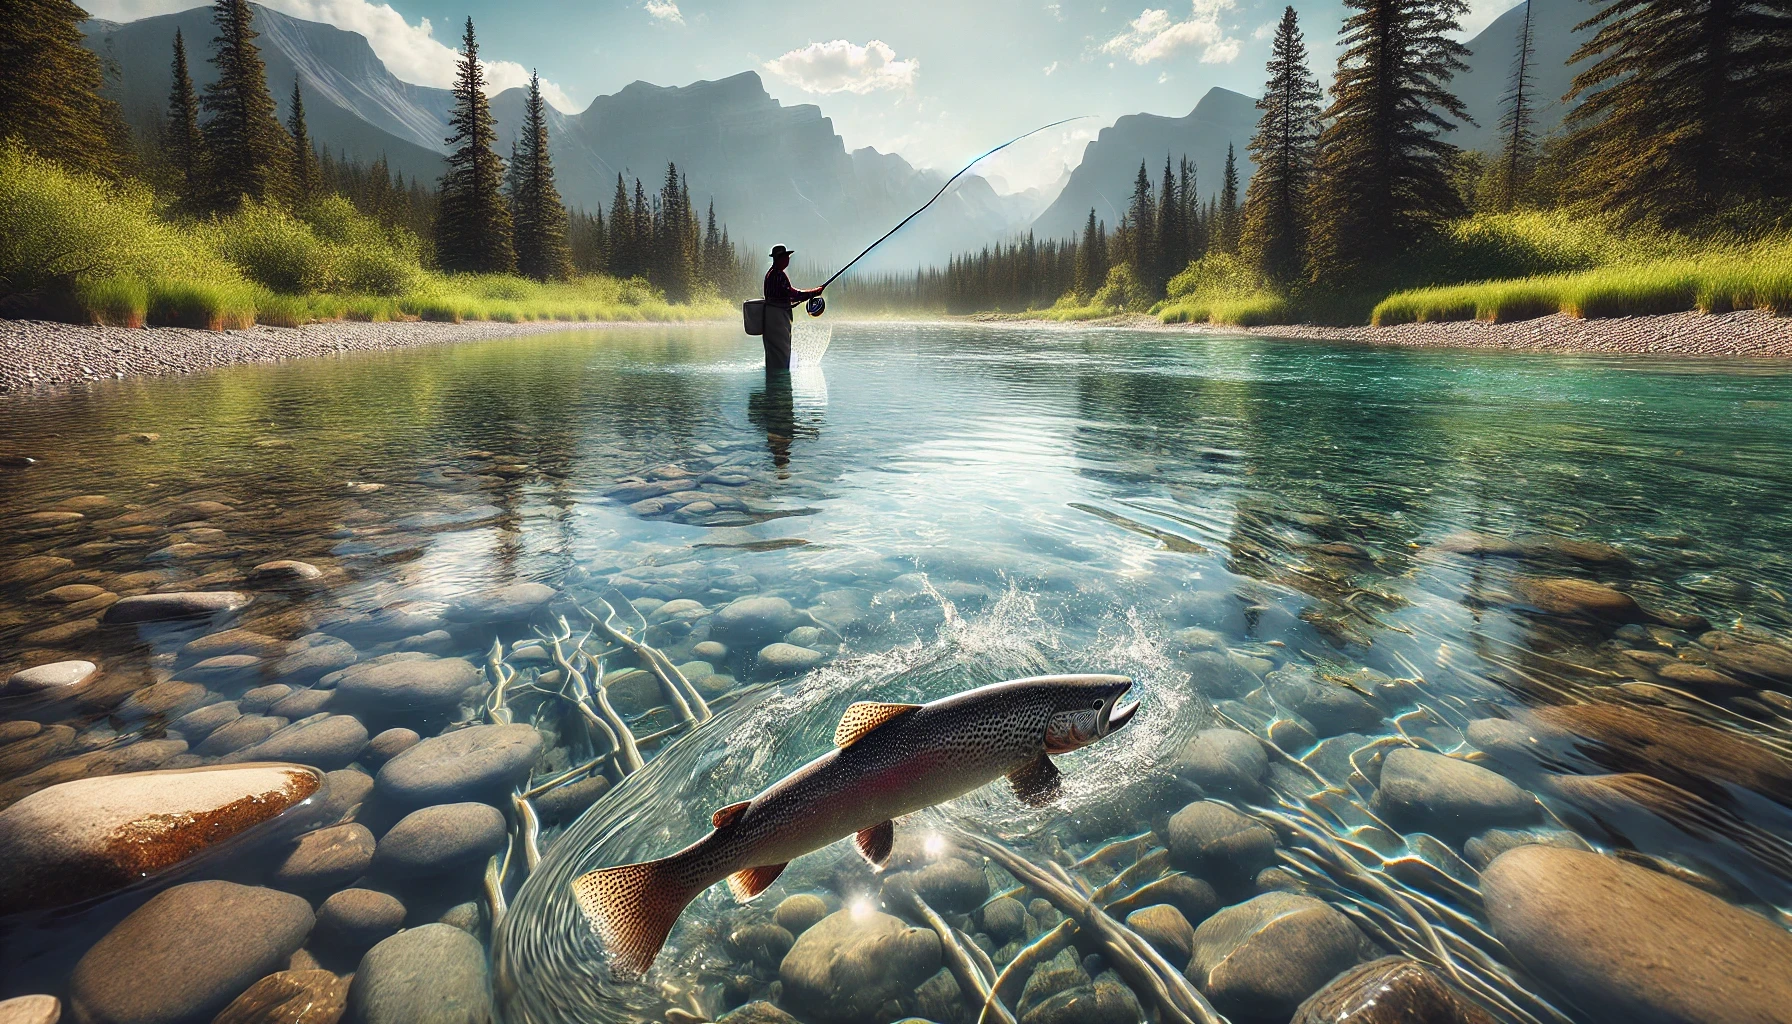 Highwood River fishing: Clear water, jumping trout, lush greenery, and majestic Rocky Mountains